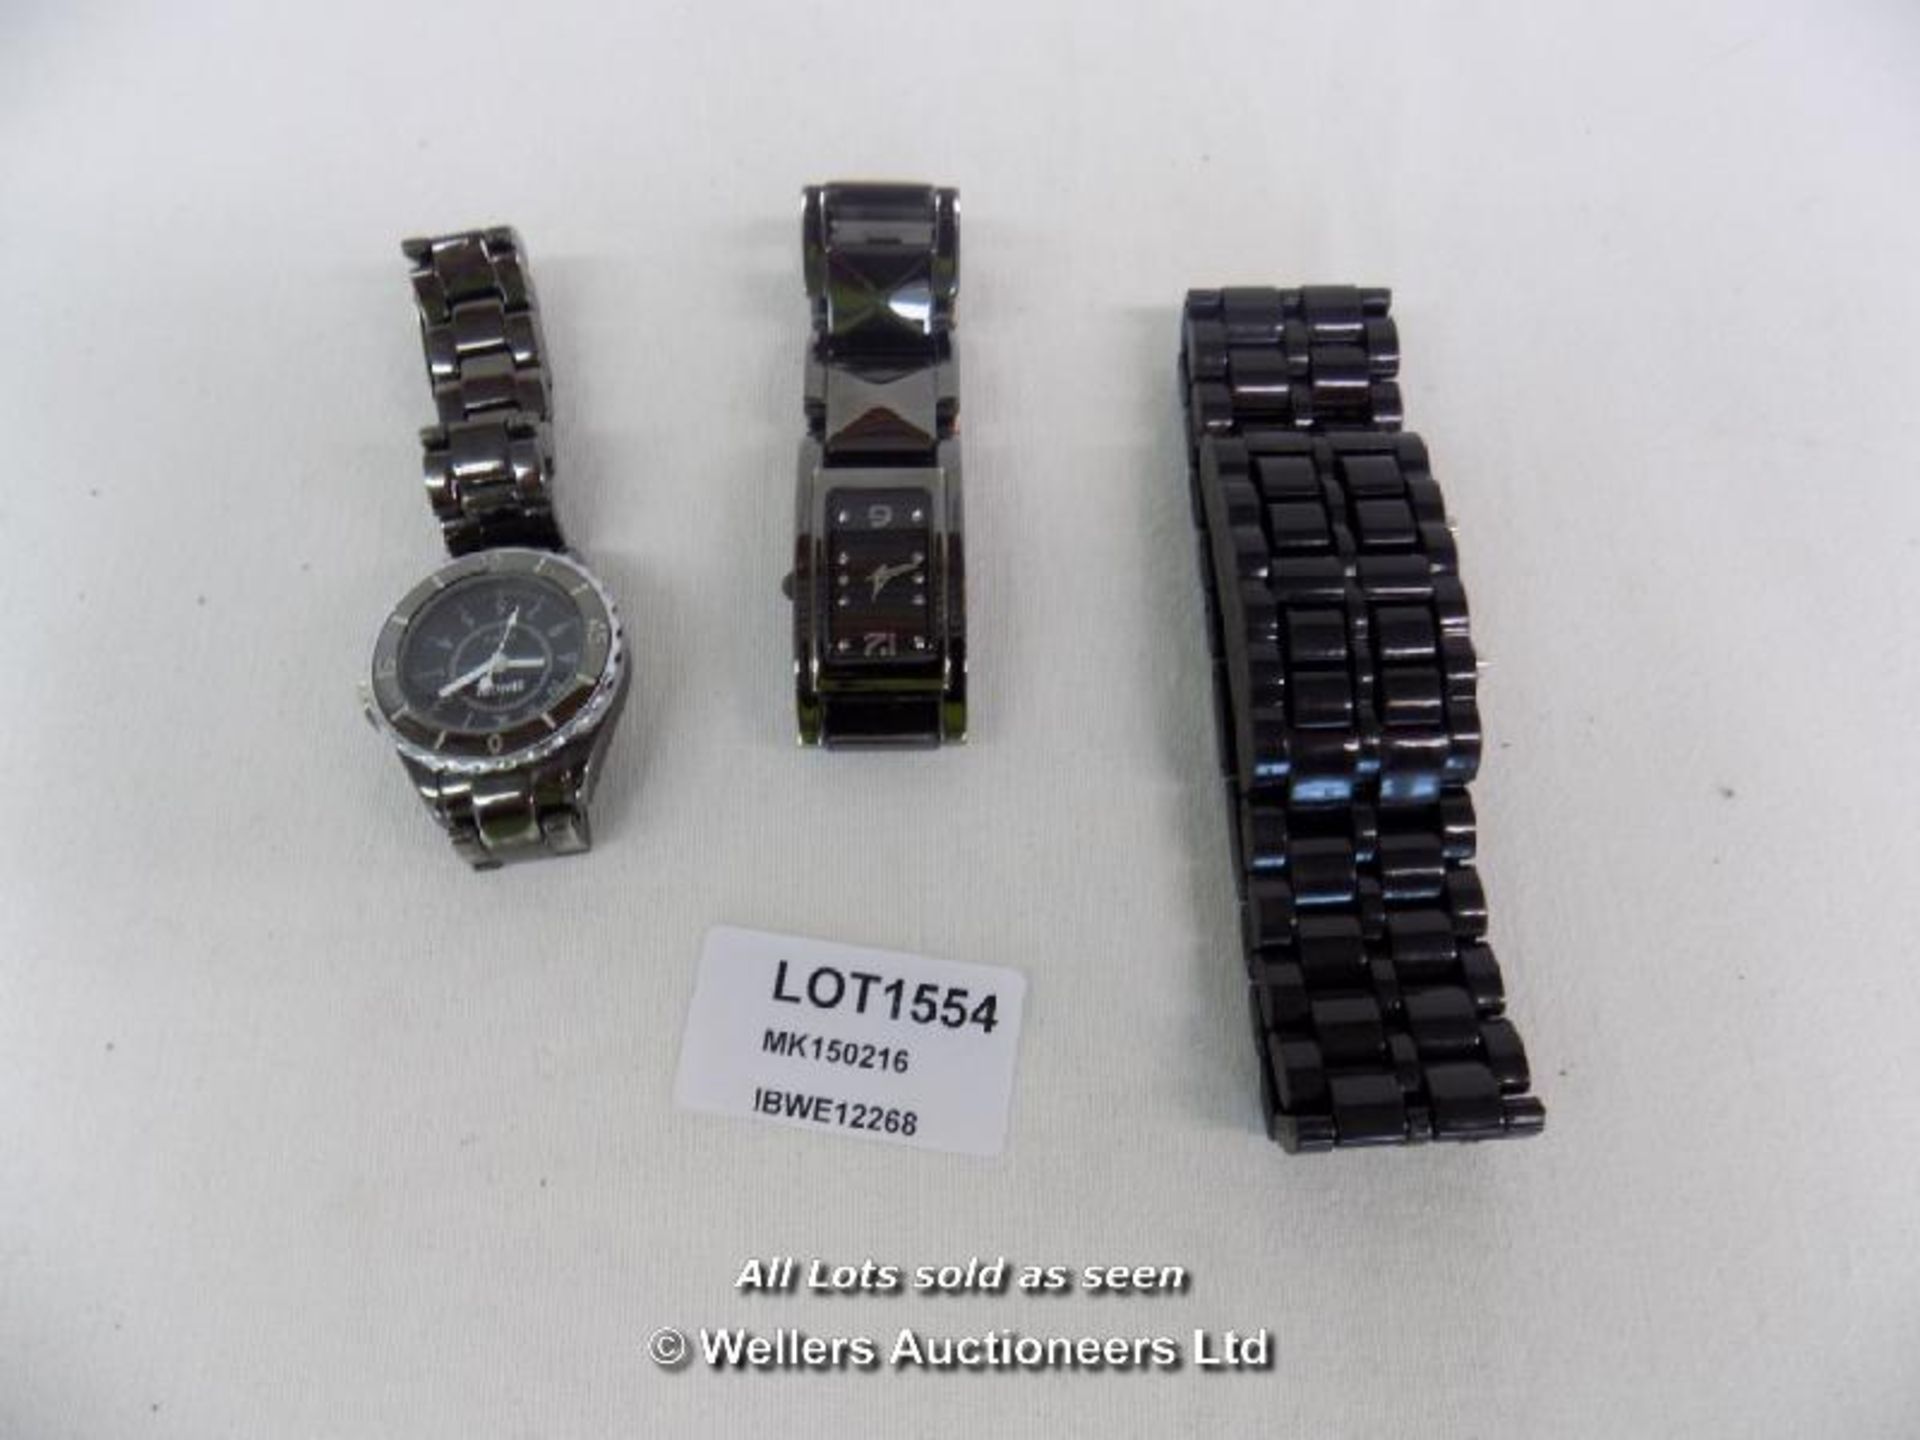 1 X BAG 3 X WATCHES INCLUDING SINOBI & NEXT / GRADE: UNCLAIMED PROPERTY / UNBOXED (DC1) {MK150216}